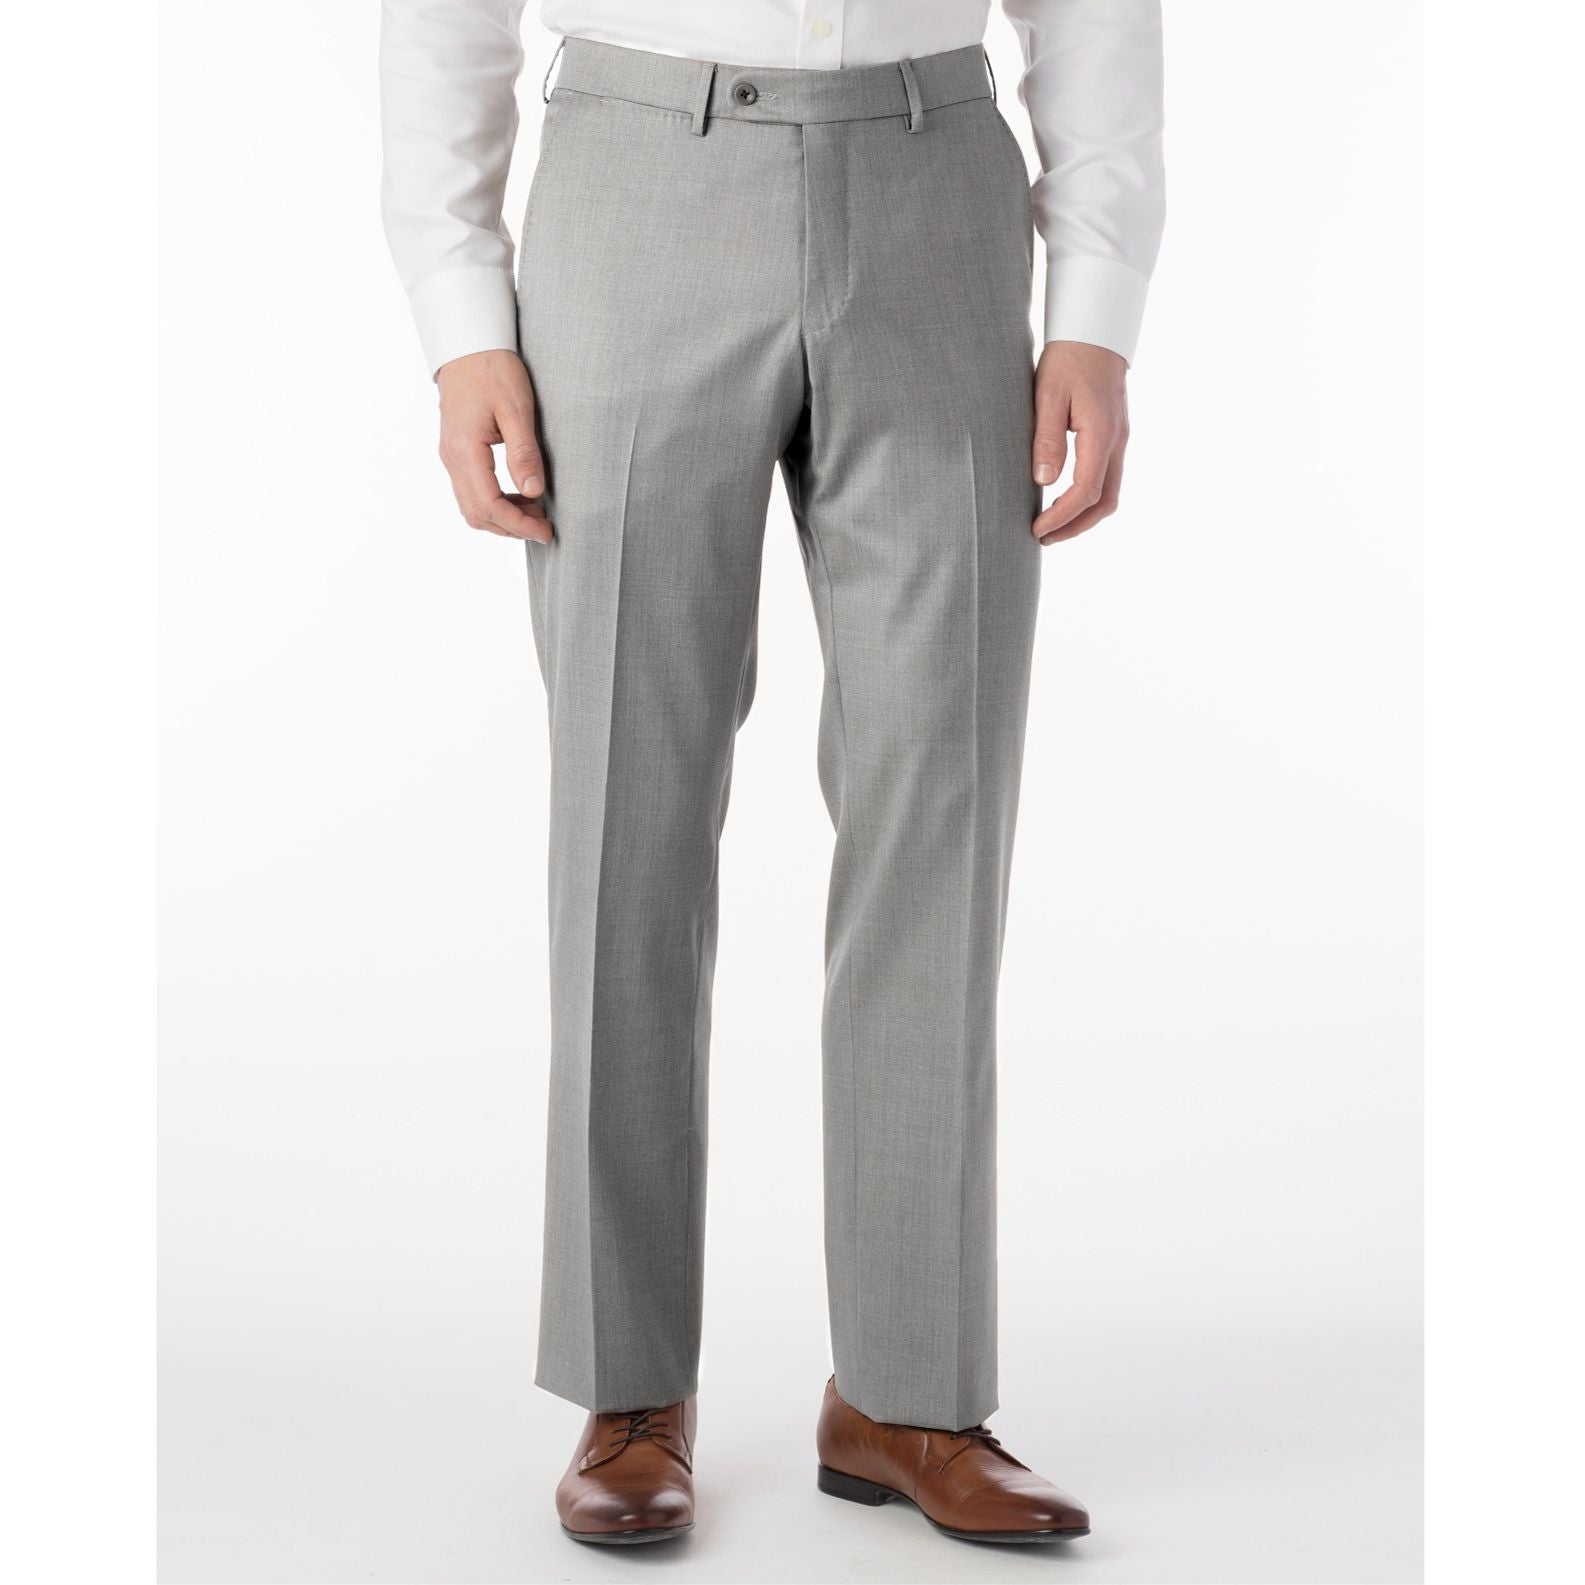 Super 130s Italian Luxury Ultimate Comfort Wool Tropical Flat Front Trouser in Light Grey by 6 East by Ballin